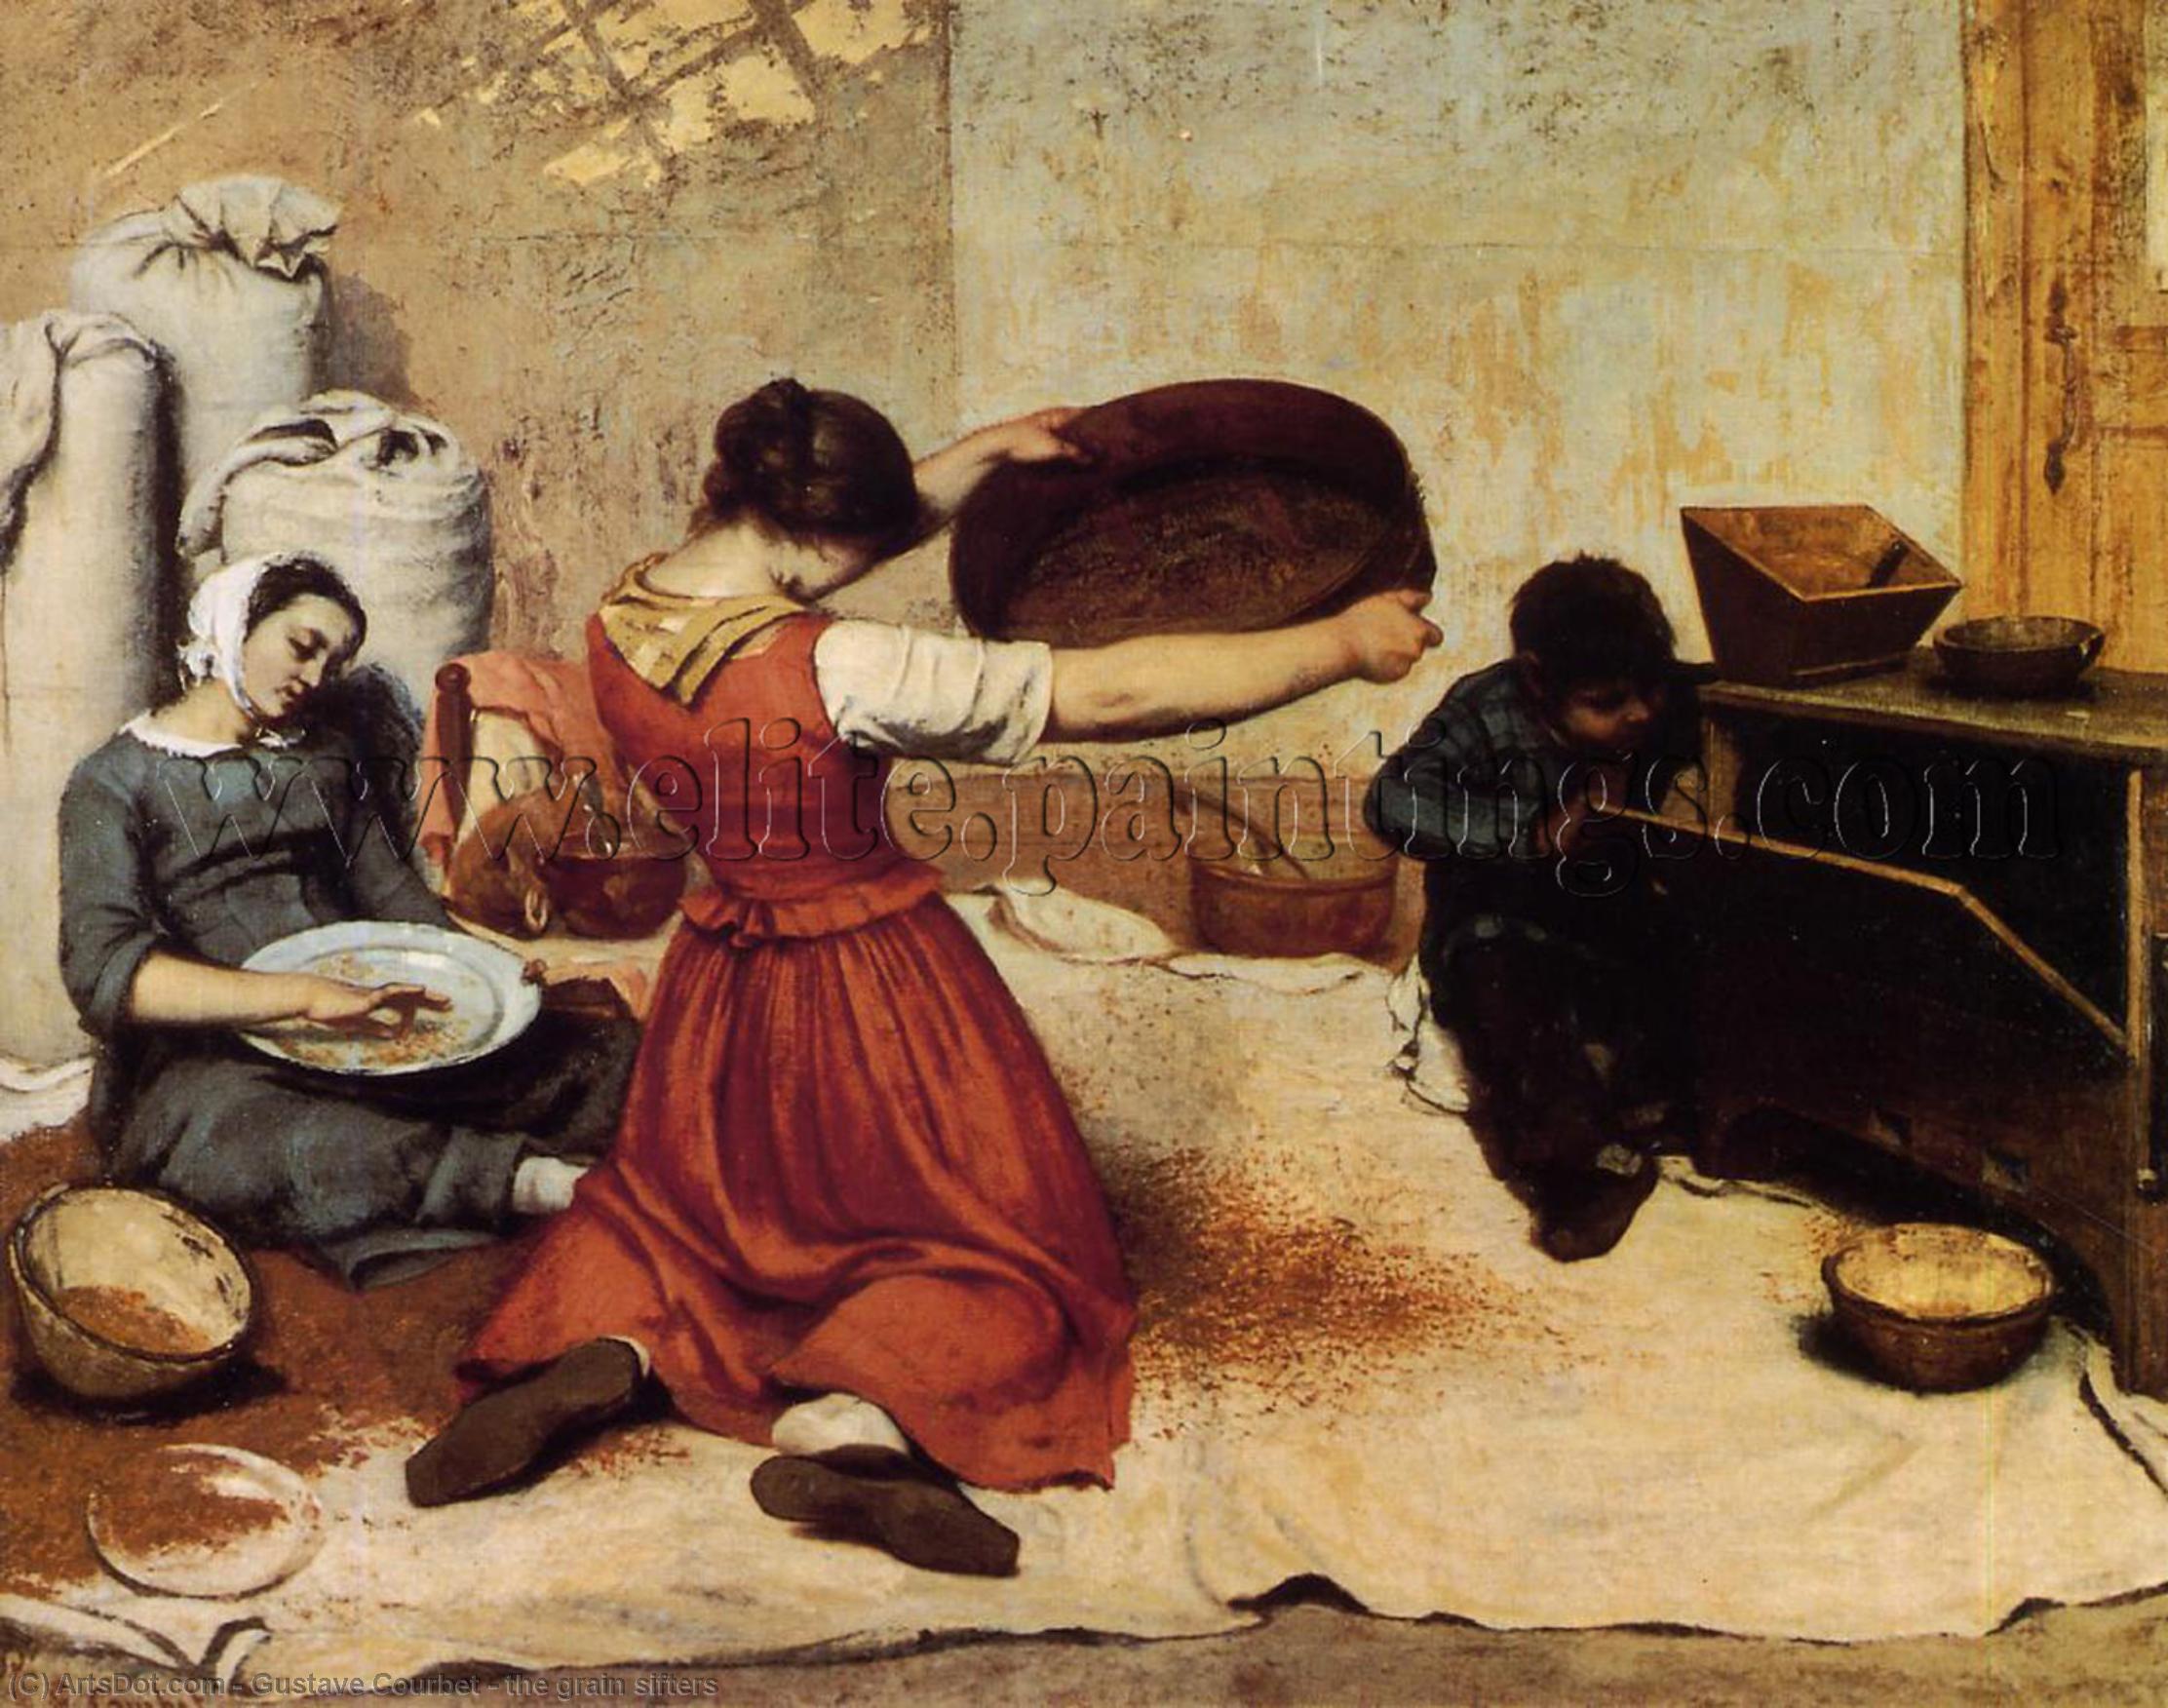 WikiOO.org - Encyclopedia of Fine Arts - Maleri, Artwork Gustave Courbet - the grain sifters